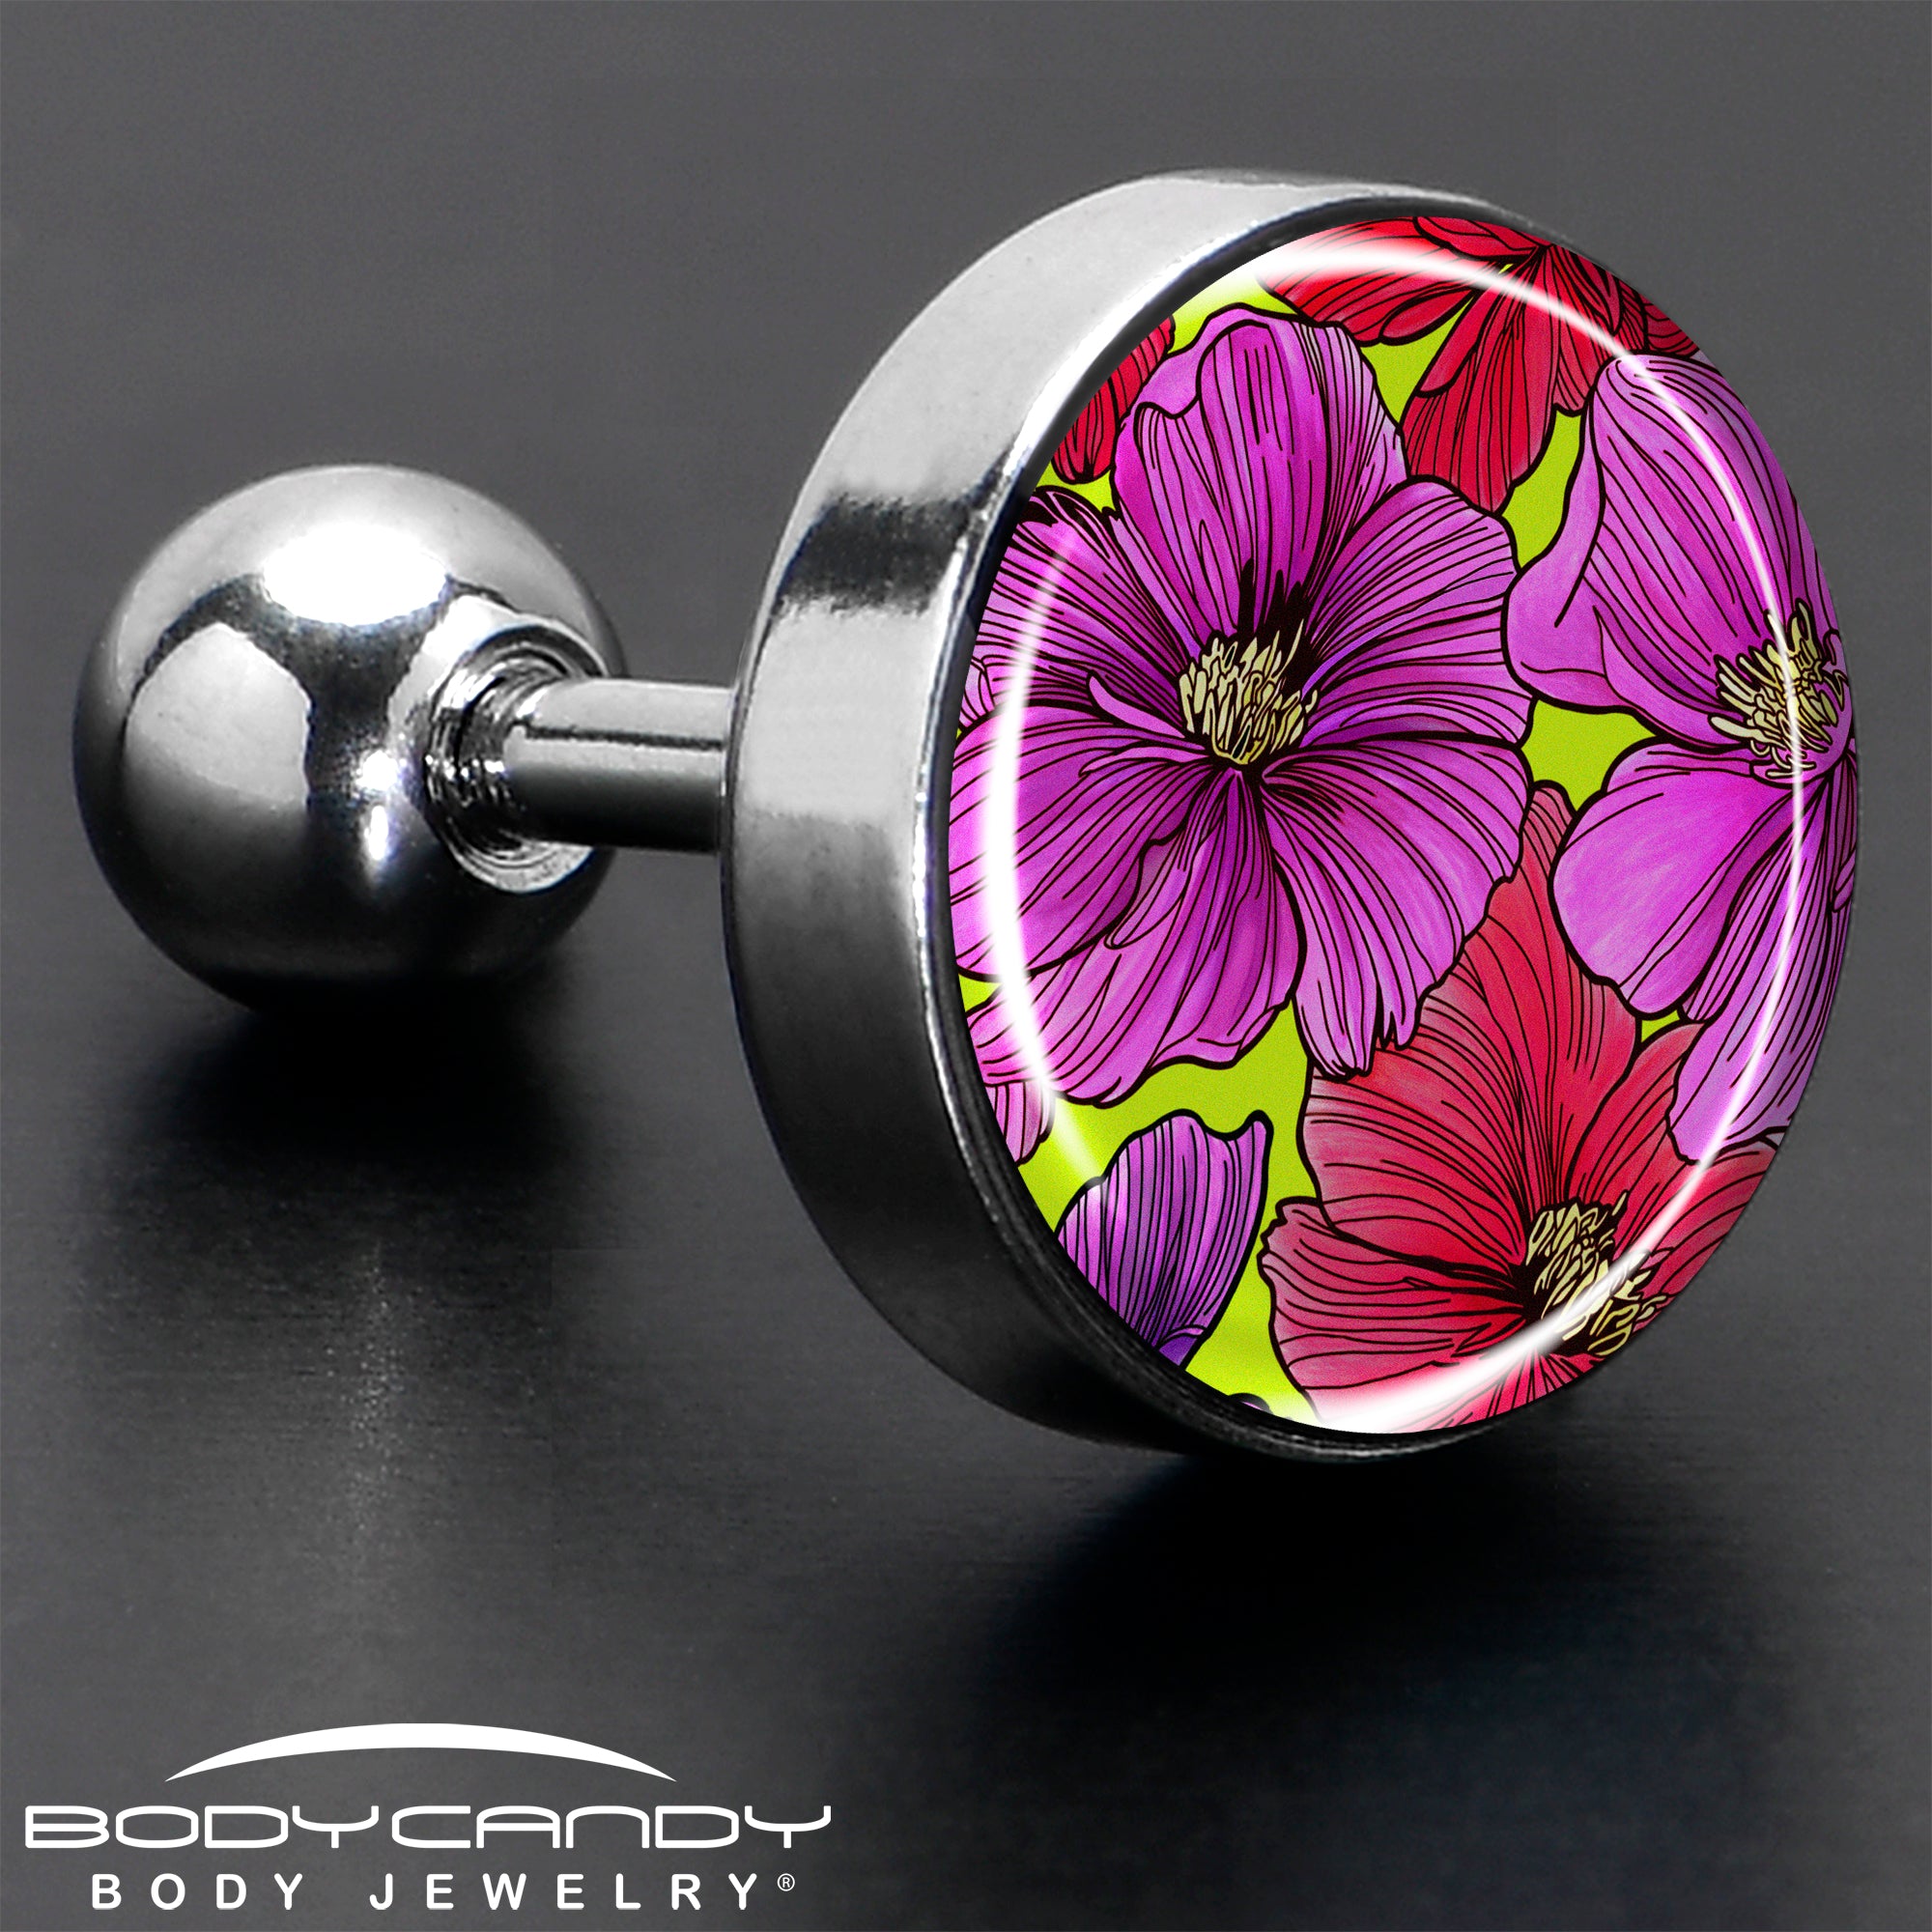 16 Gauge 1/4 Blossom Creation Tropical Floral Flowers Cartilage Earring